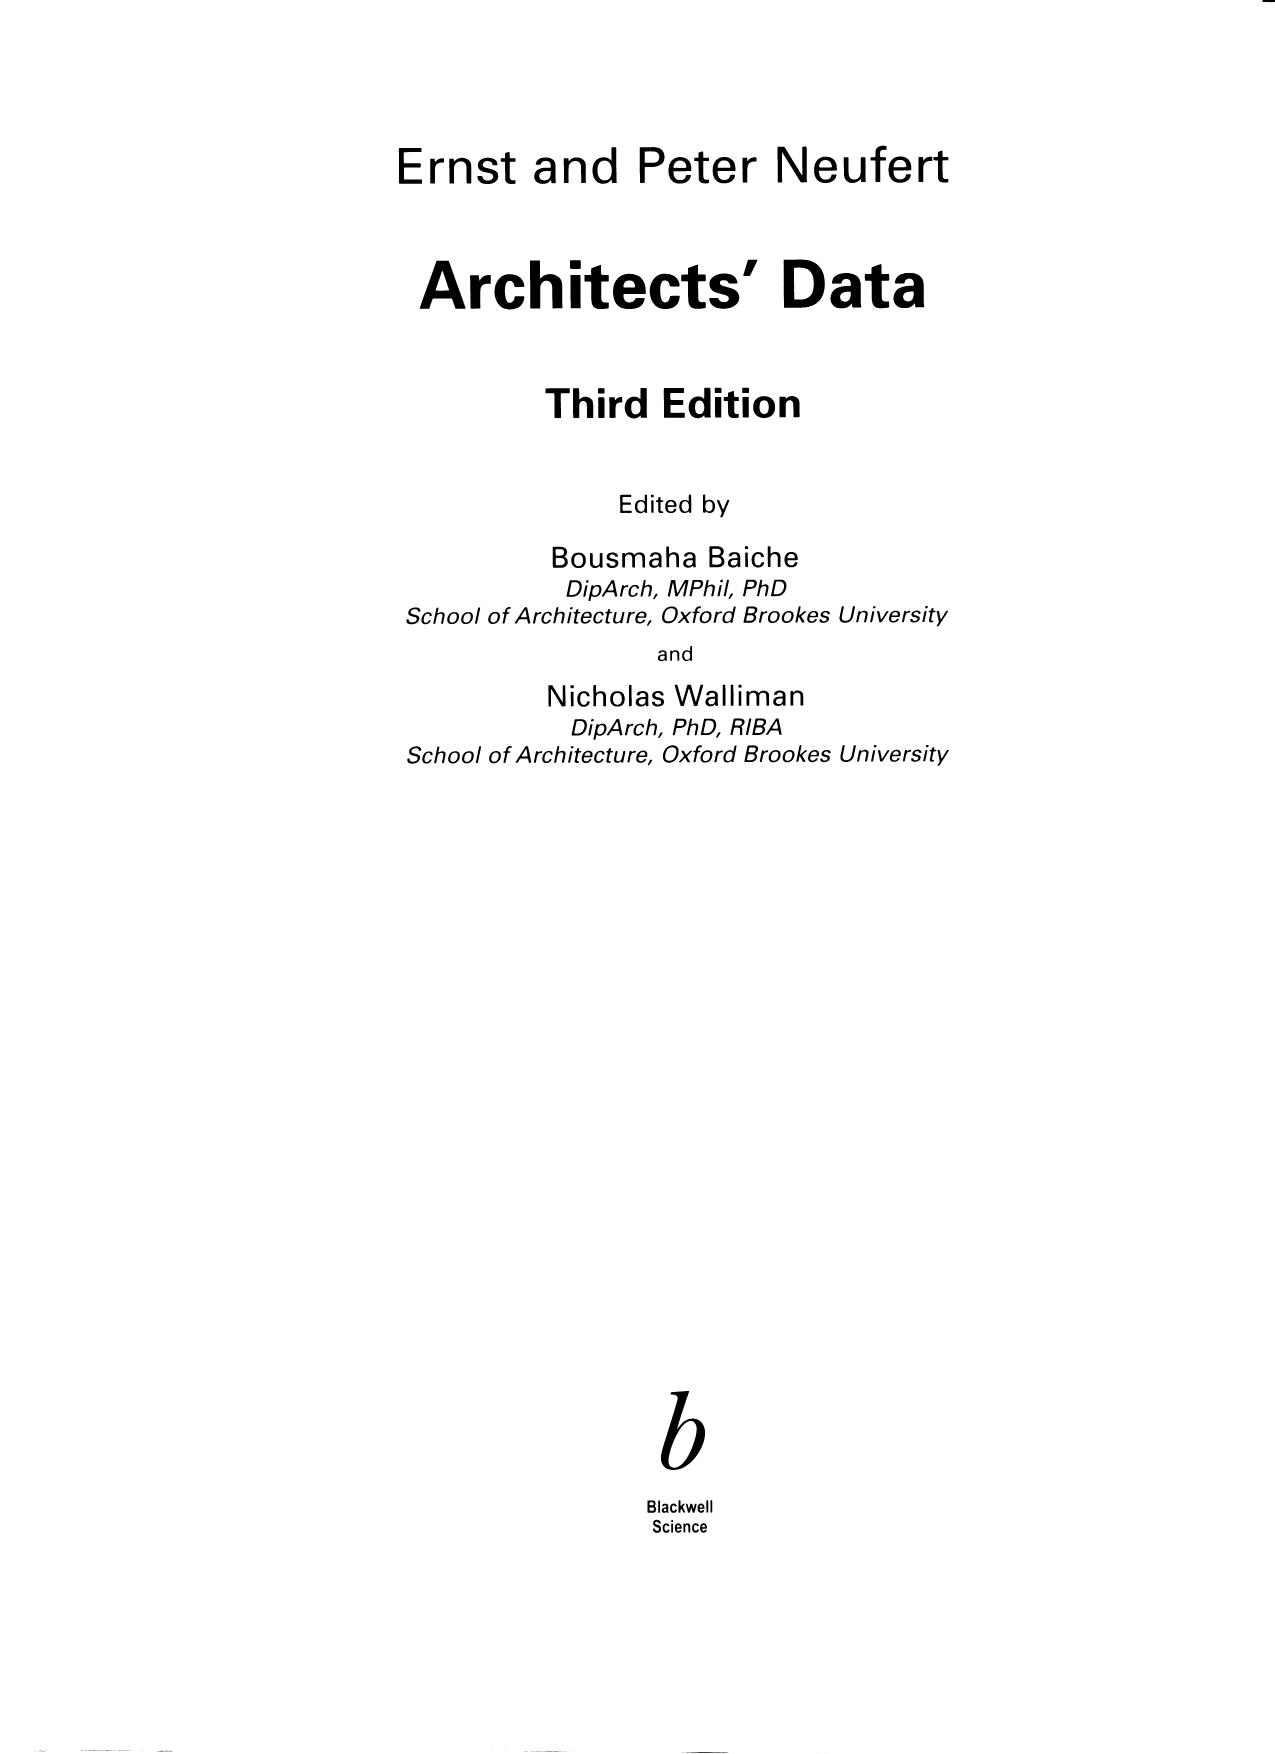 Architects' Data 3rd Ed Blackwell Science 1999